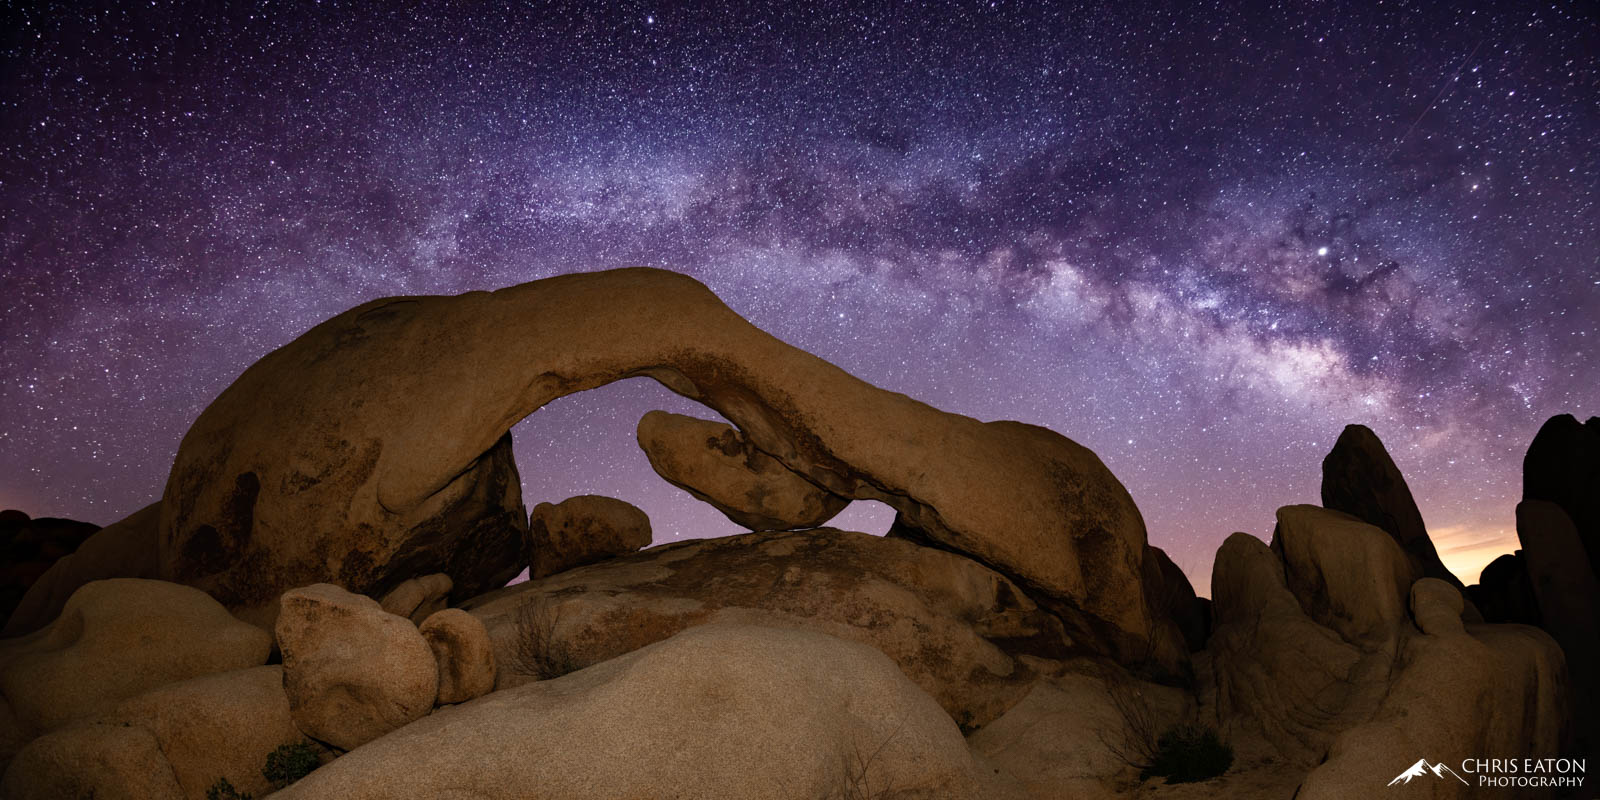 The early morning Milky Way rises above Arch Rock in the White Tank area of Joshua Tree National Park.